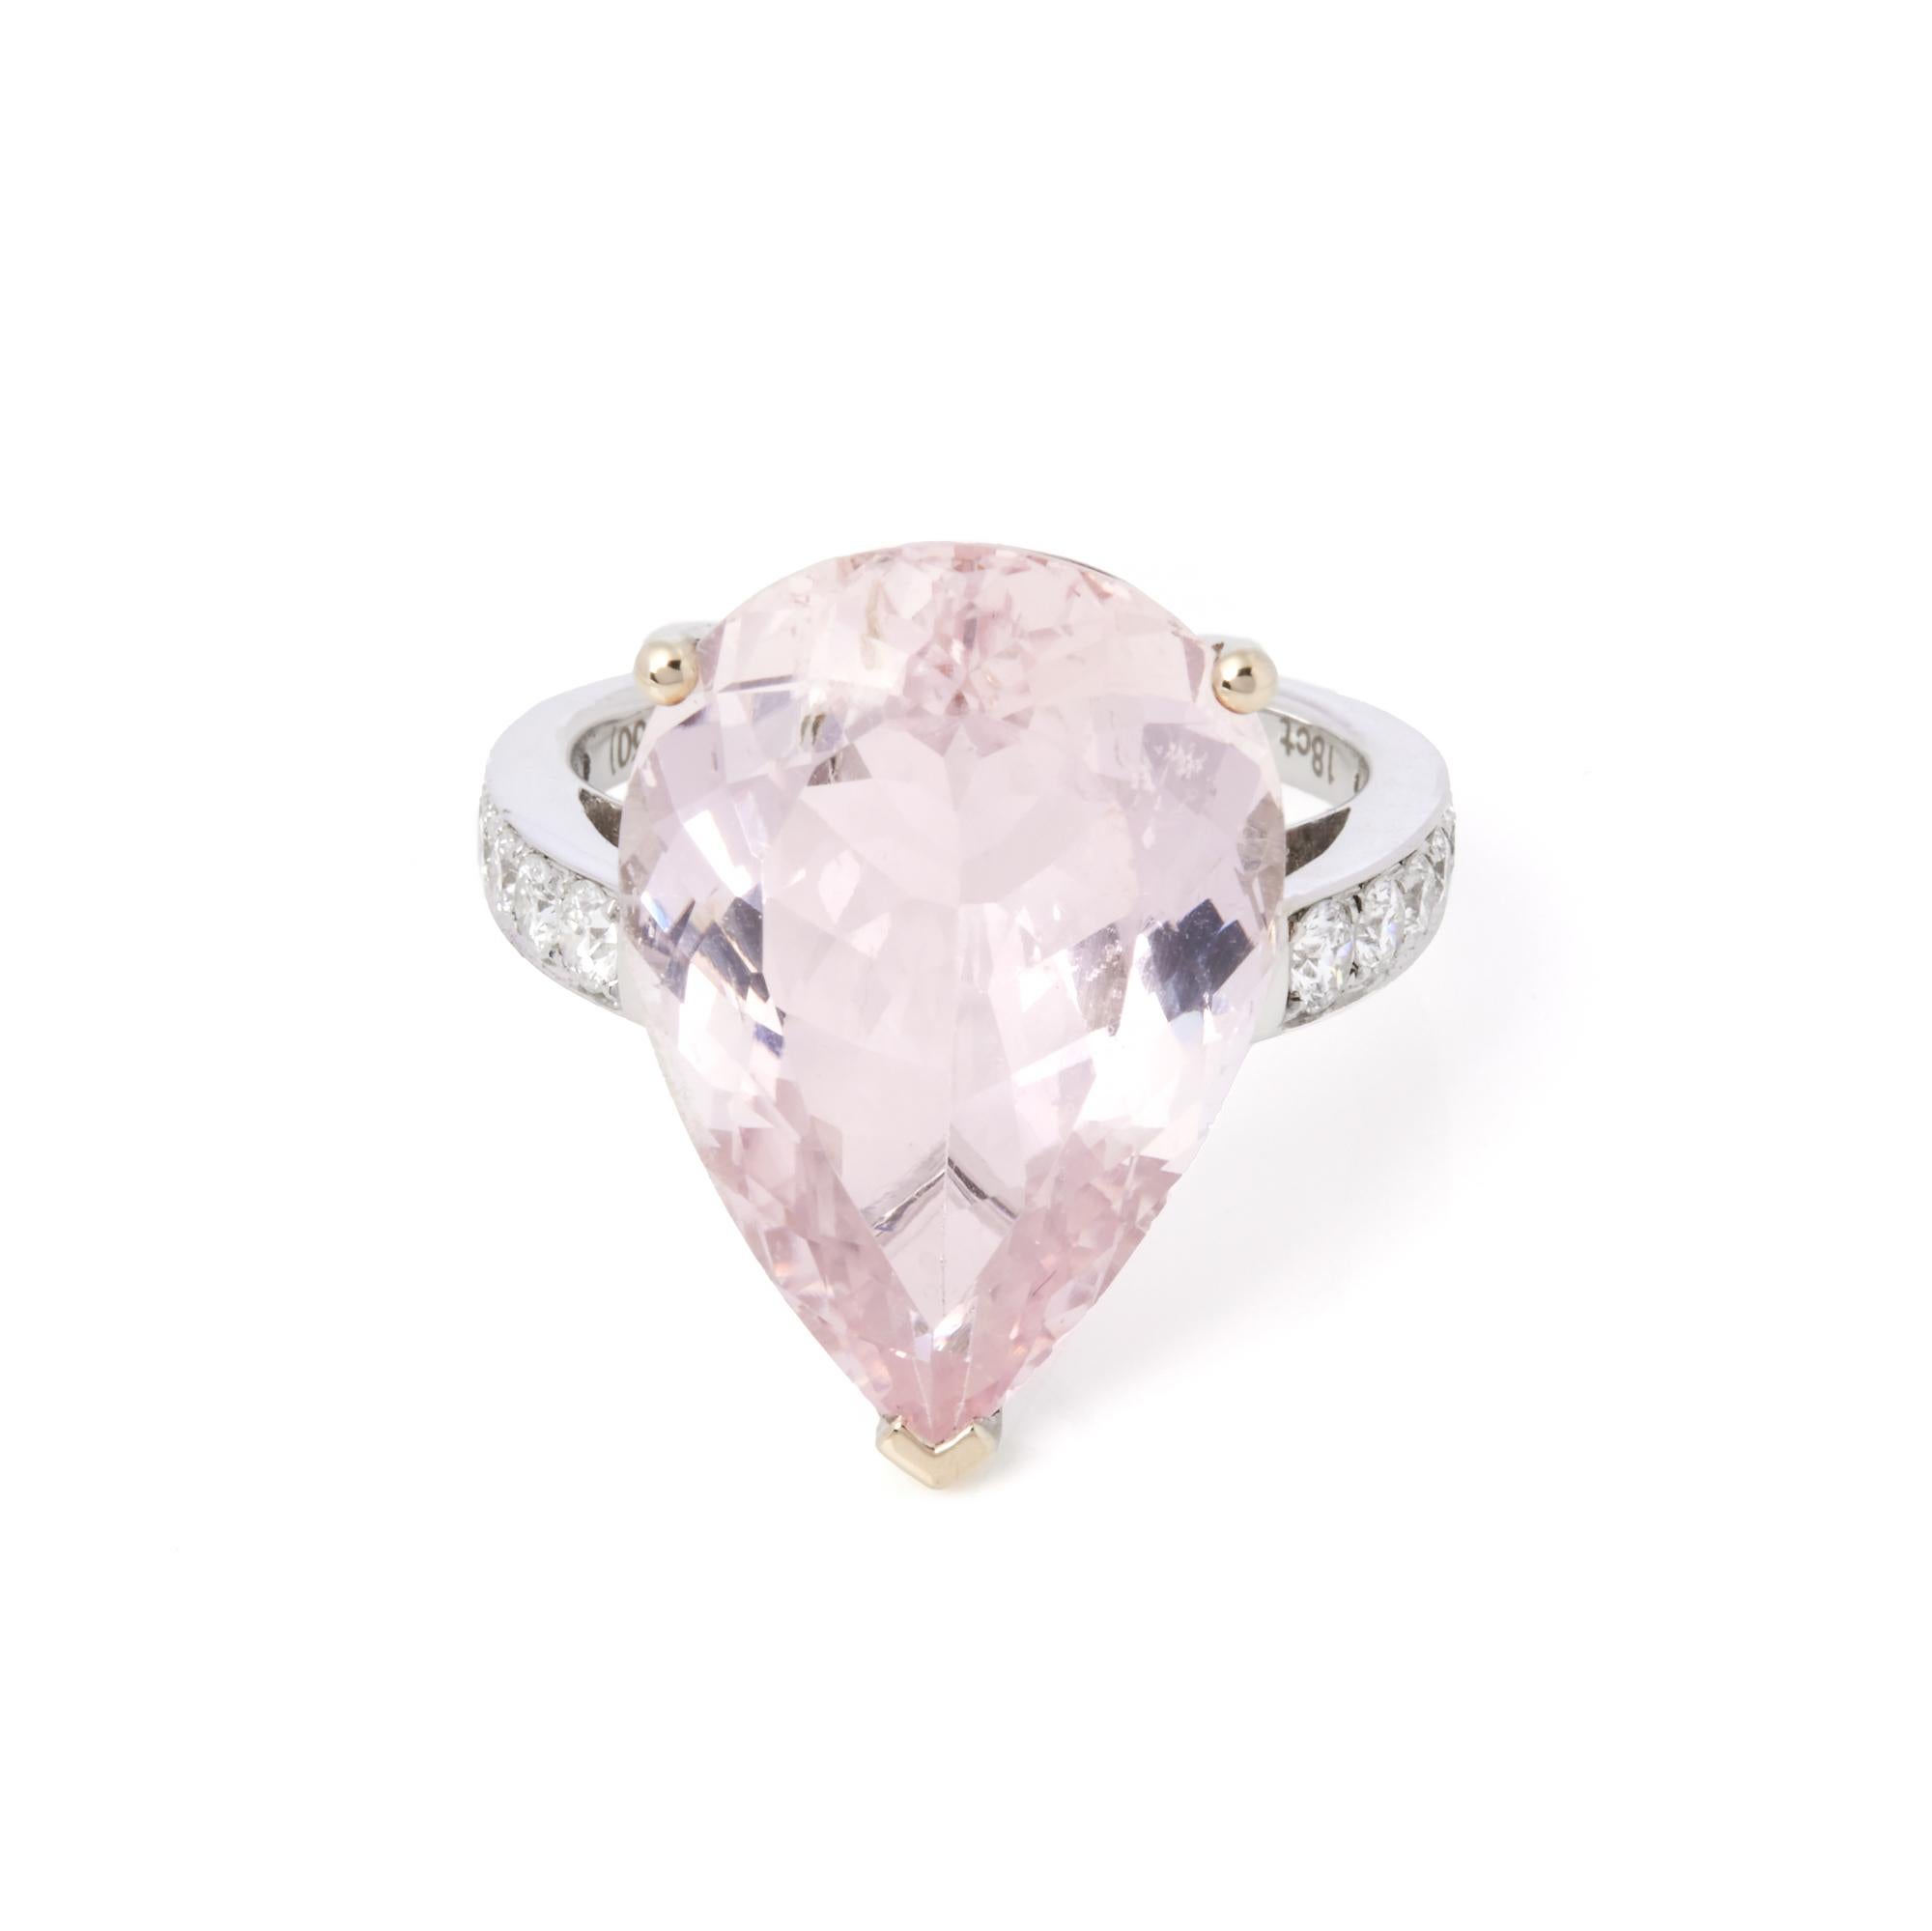 This ring is from the private collection of gemstone jewellery individually designed by David Jerome. It features a pear cut morganite sourced from Brazil set with diamonds. Accompanied by an IGR gem certificate. UK ring size N. EU ring size 54. US